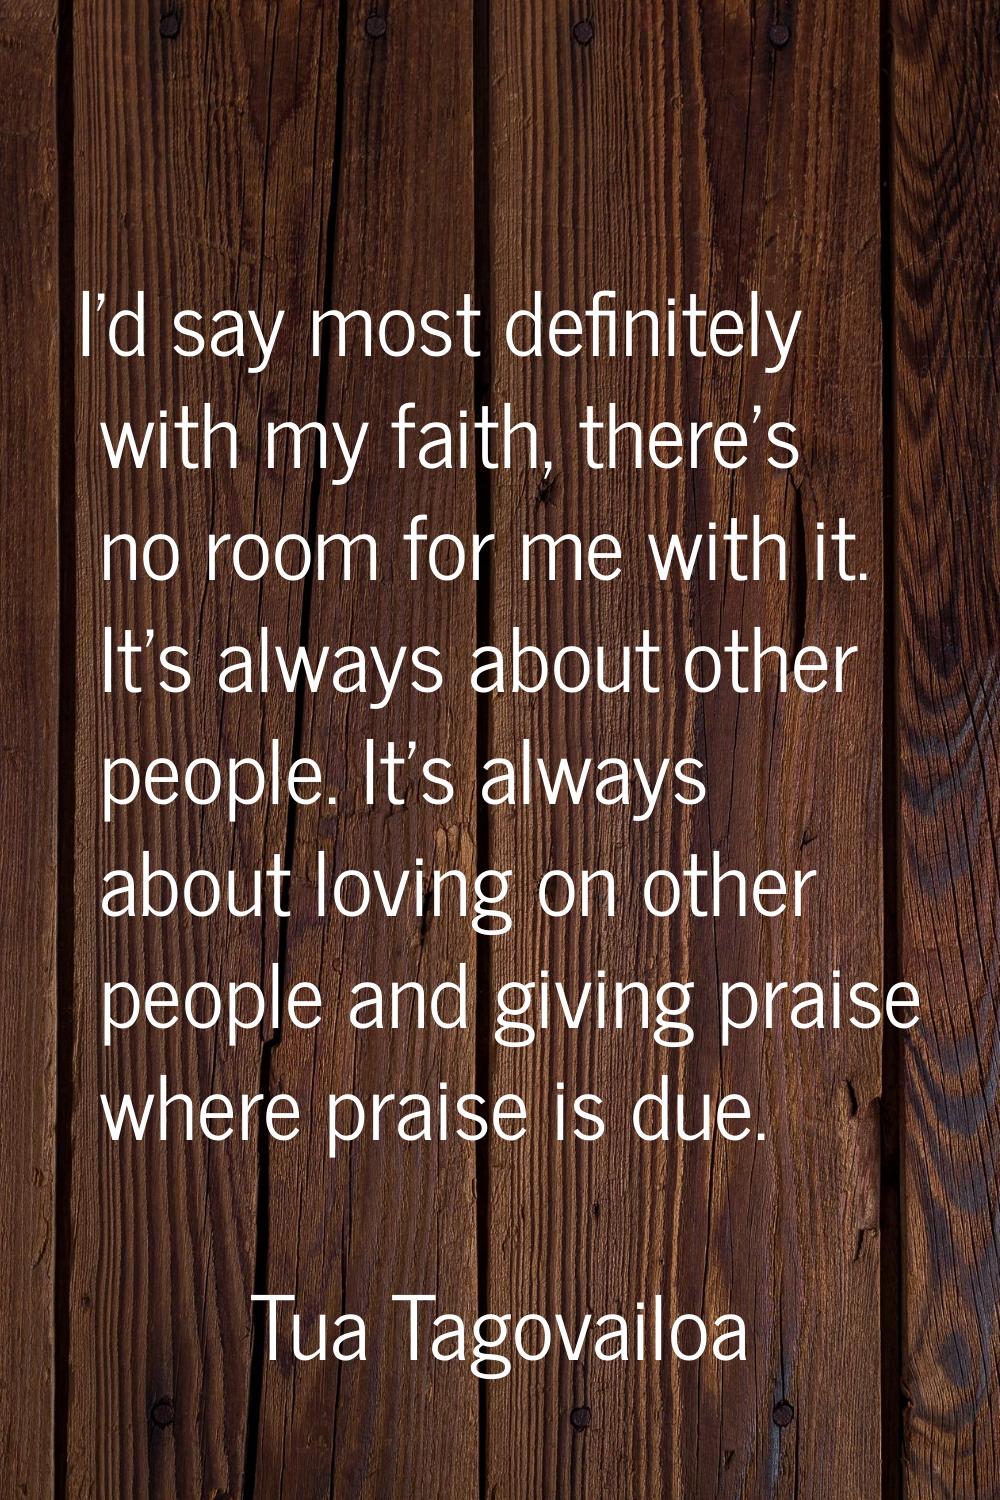 I'd say most definitely with my faith, there's no room for me with it. It's always about other peop